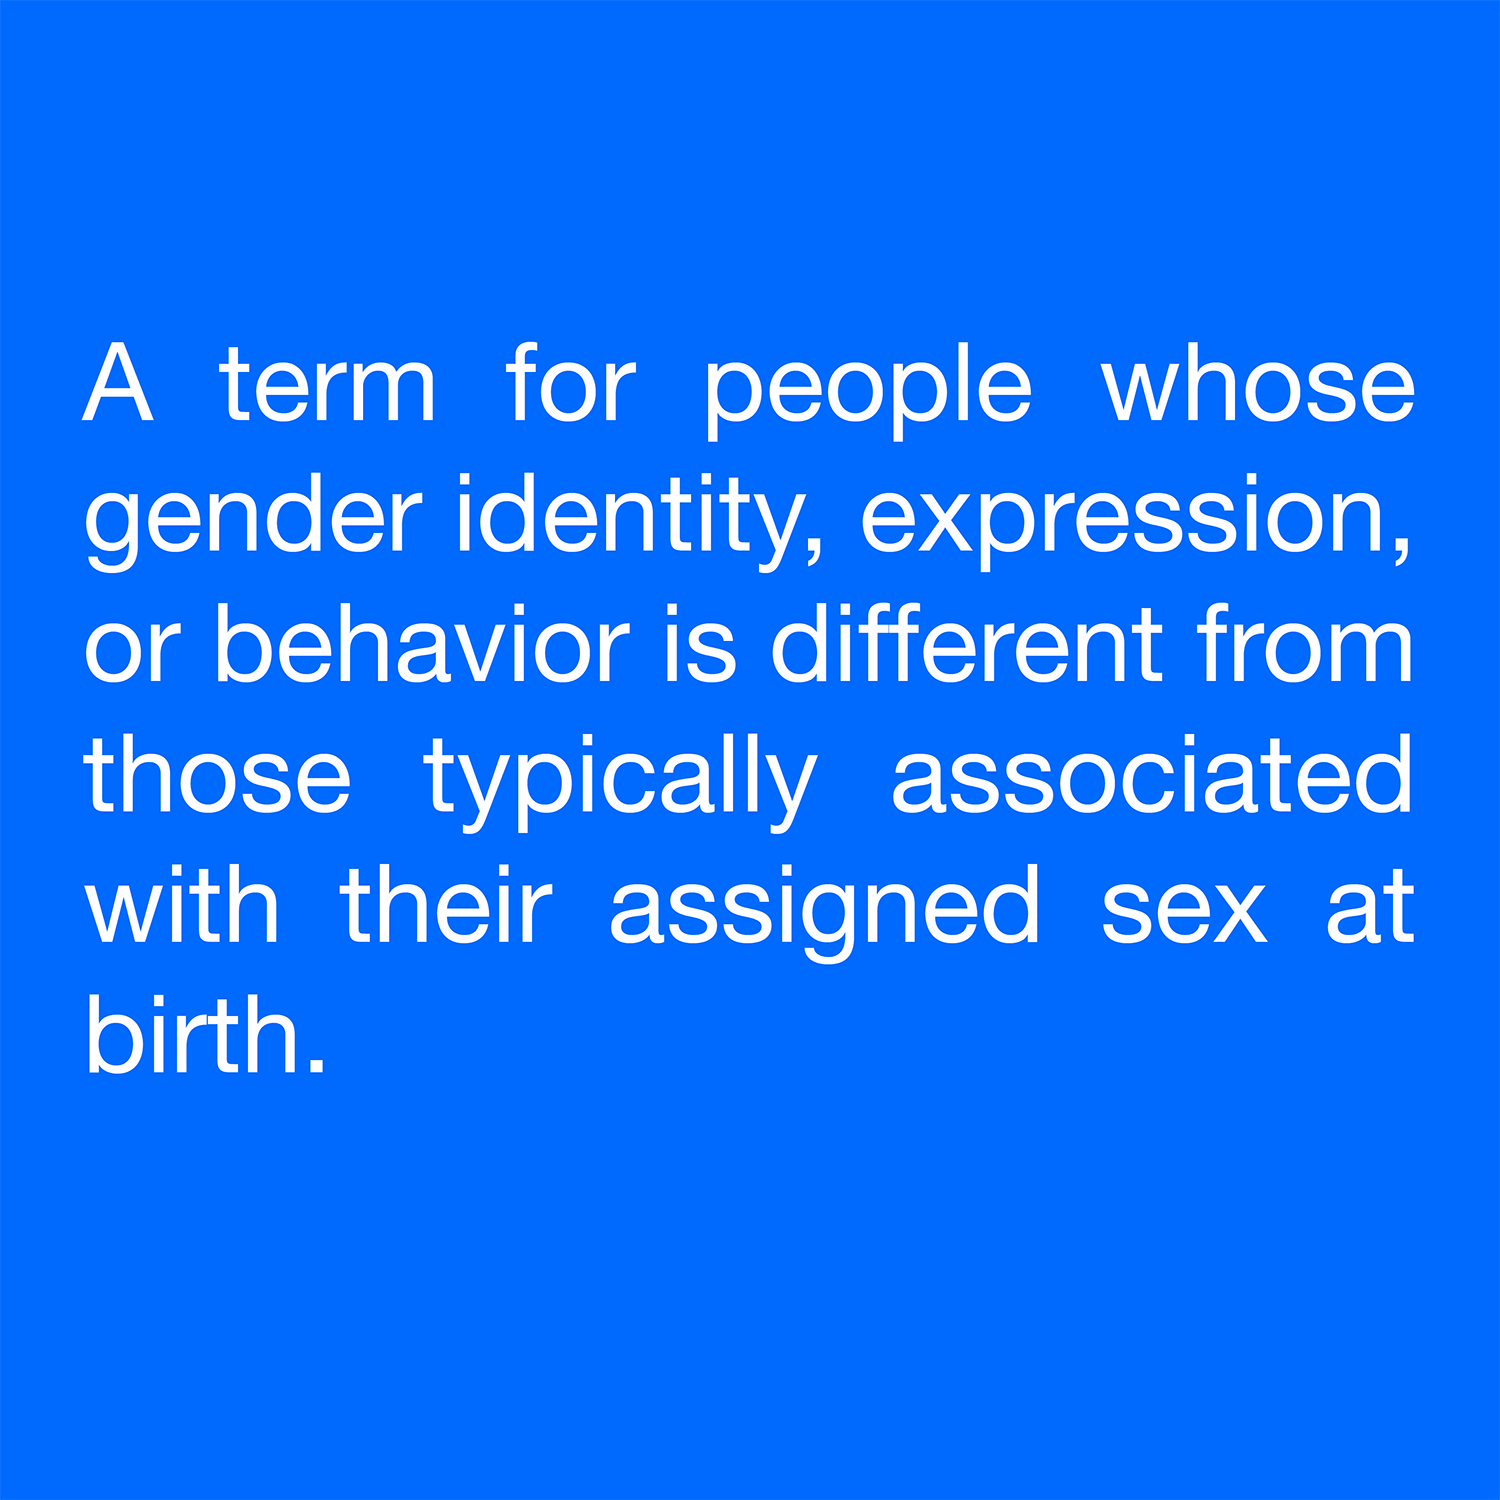  A term for people whose gender identity, expression, or behavior is different from those typically associated with their assigned sex at birth. 